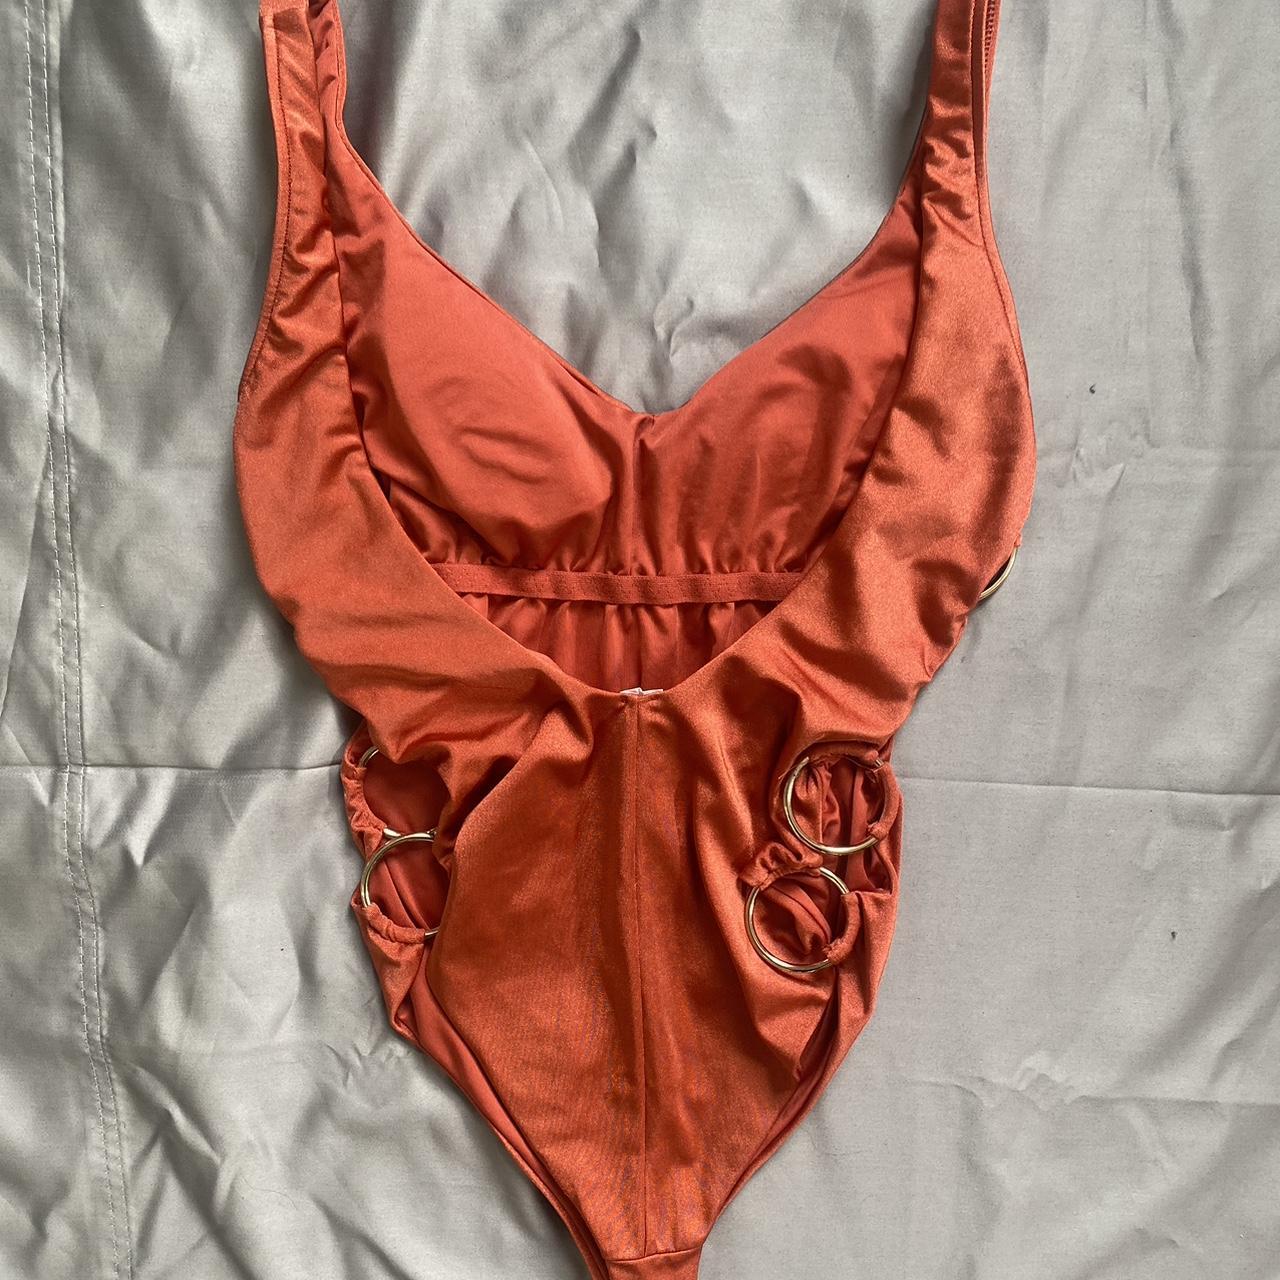 Calzedonia Women's Red and Orange Swimsuit-one-piece (2)